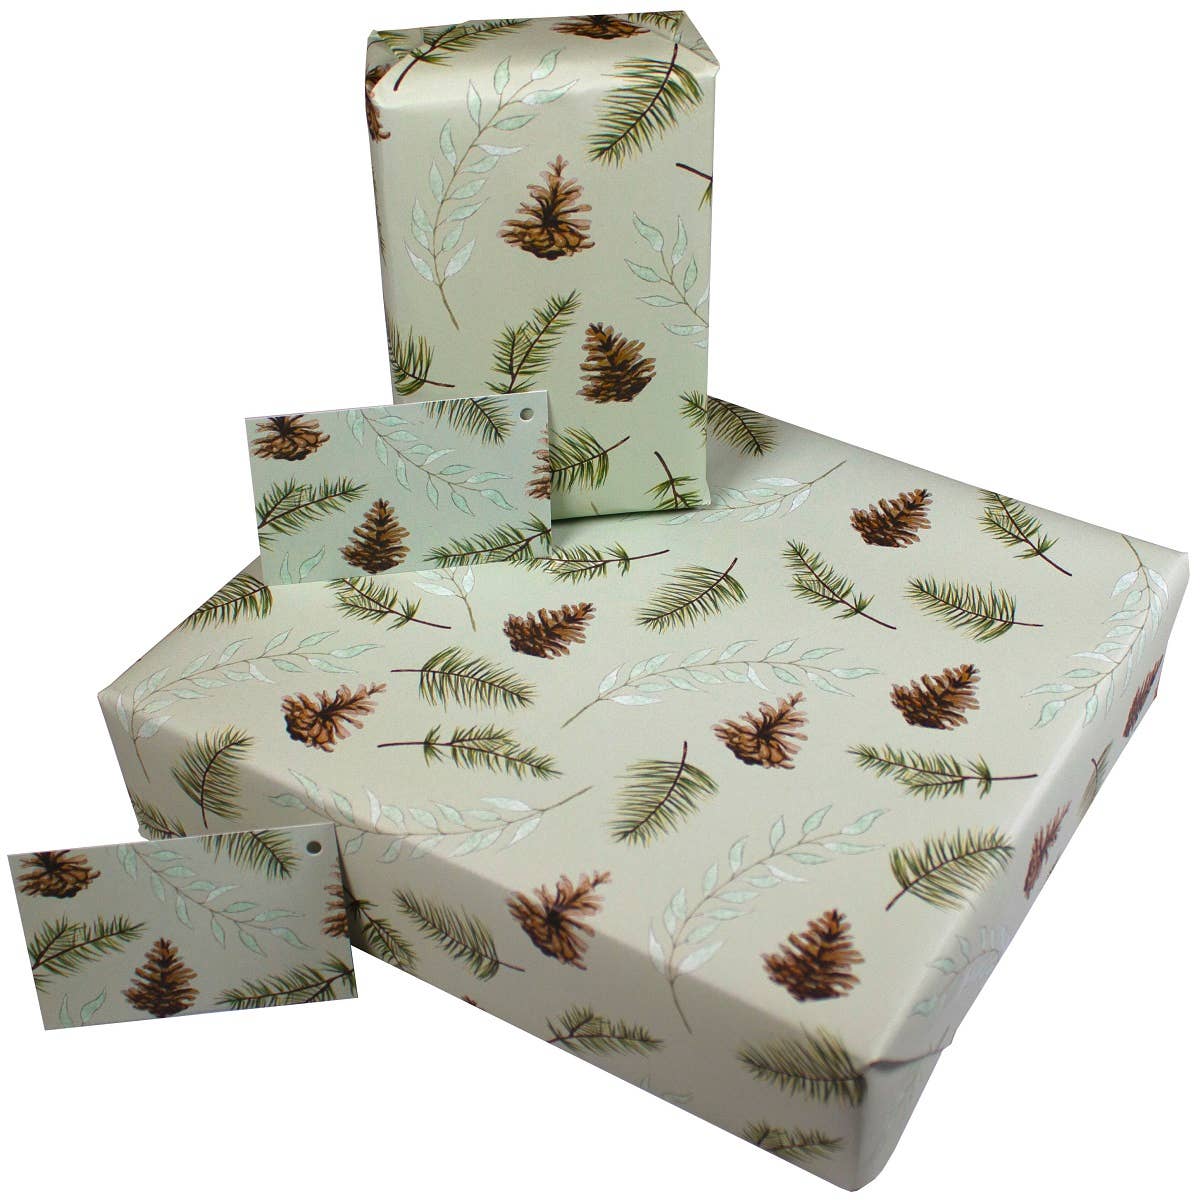 Re-wrapped - Festive Fir Cones Wrapping Paper • 100% Recycled • Vegan Ink